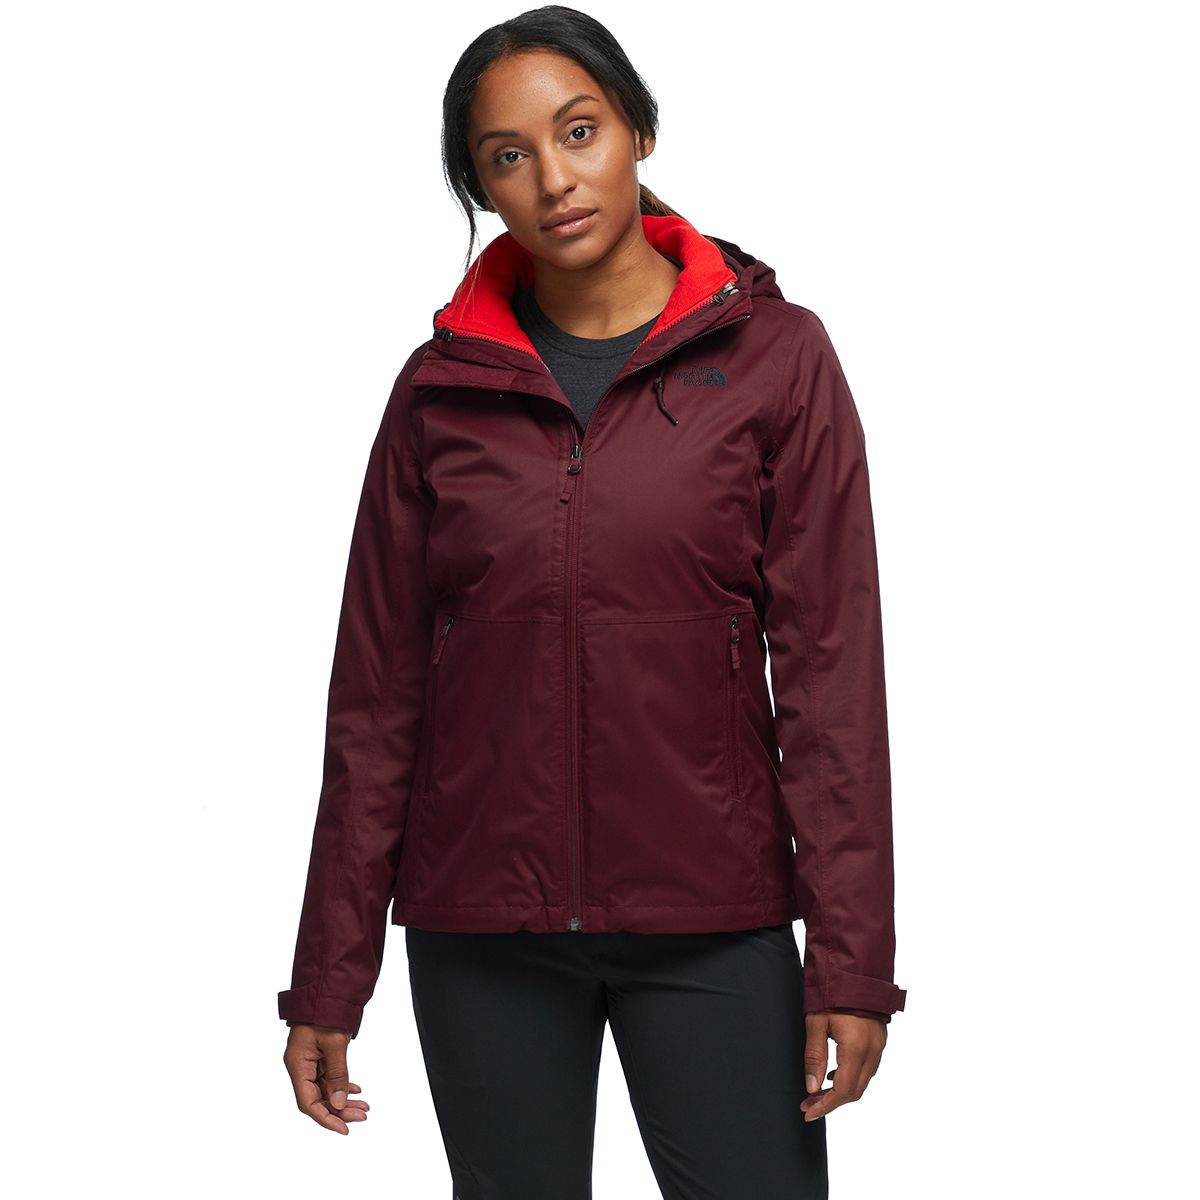 arrowood triclimate jacket review